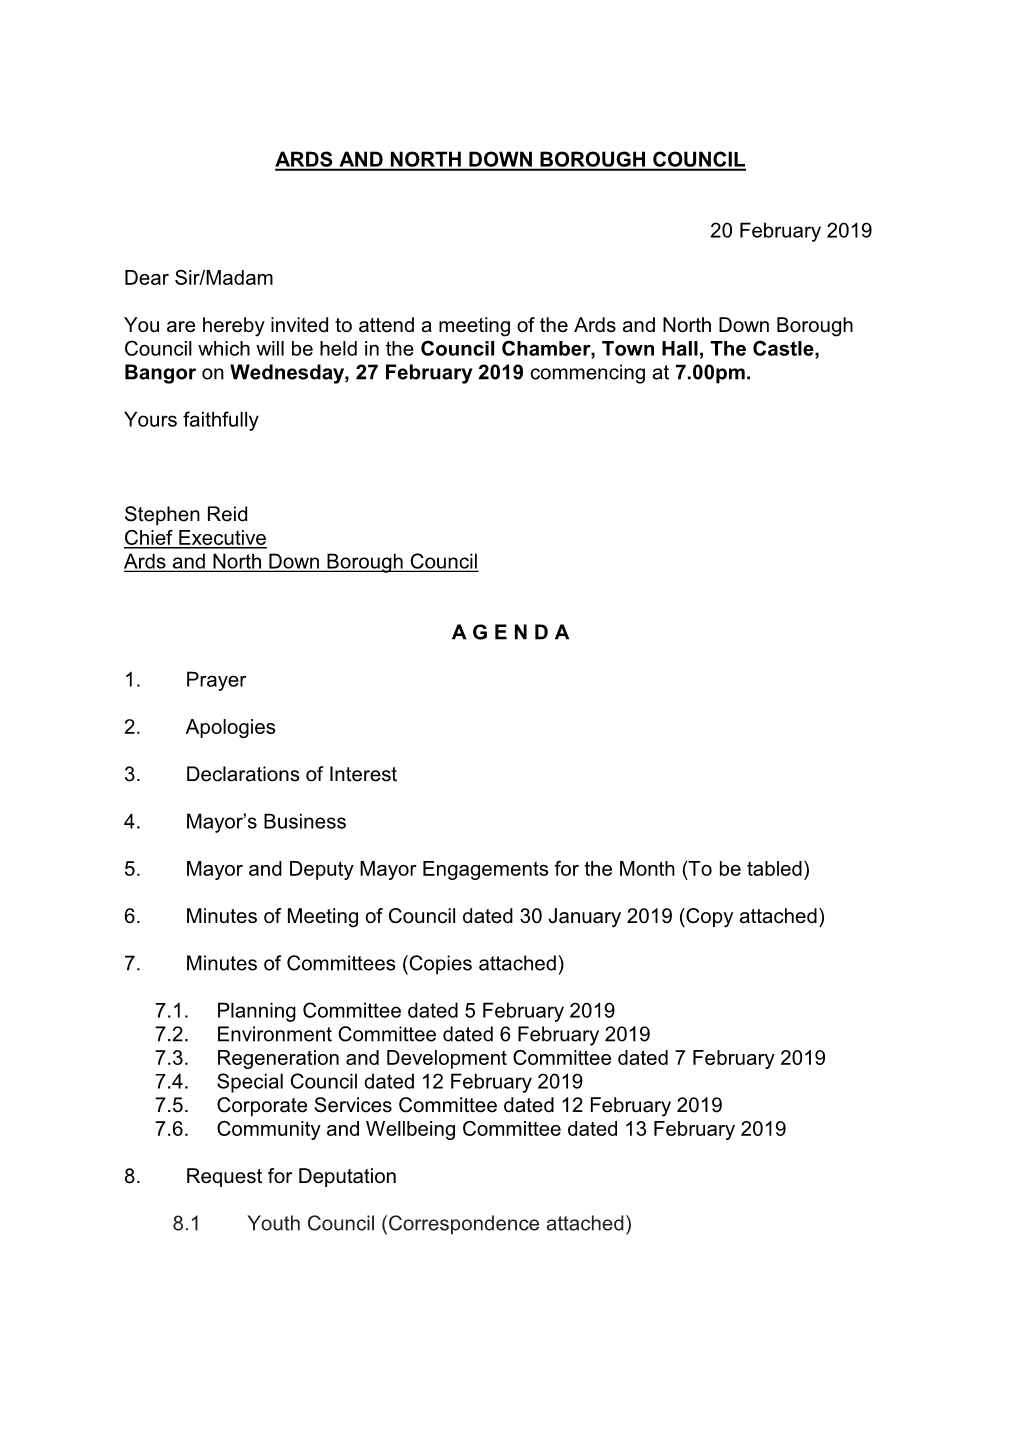 ARDS and NORTH DOWN BOROUGH COUNCIL 20 February